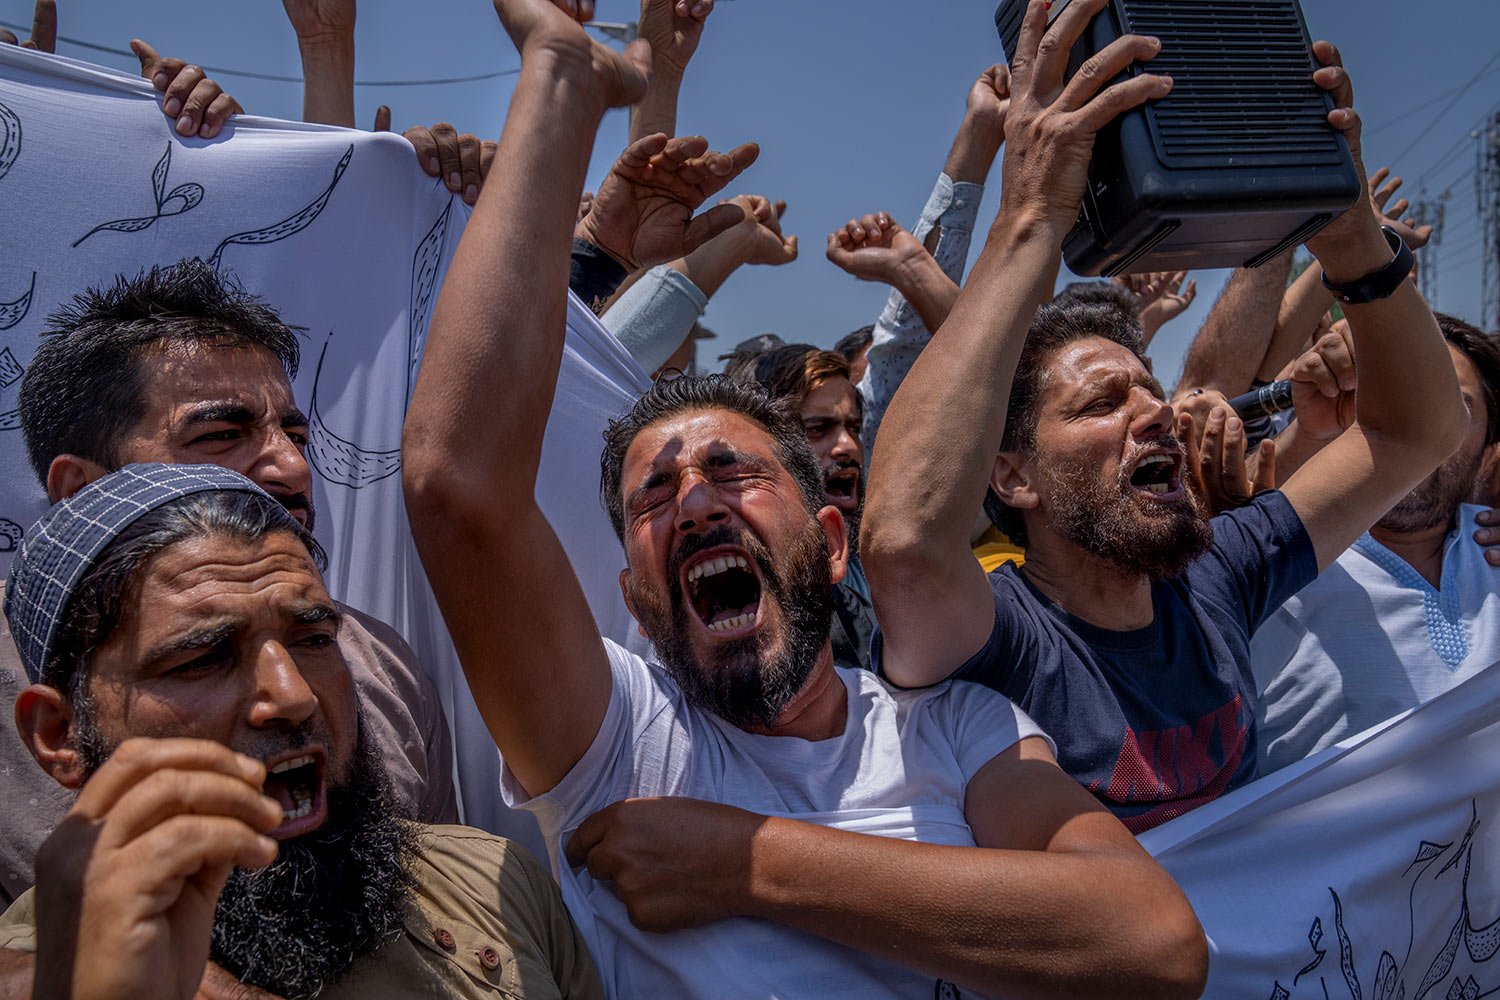  Kashmiri traders shout Islamic slogans during a protest against Nupur Sharma, a spokesperson of governing Hindu nationalist party over her remarks about Prophet Mohammed, during a protest in Srinagar, Indian controlled Kashmir, Friday, June 10, 2022